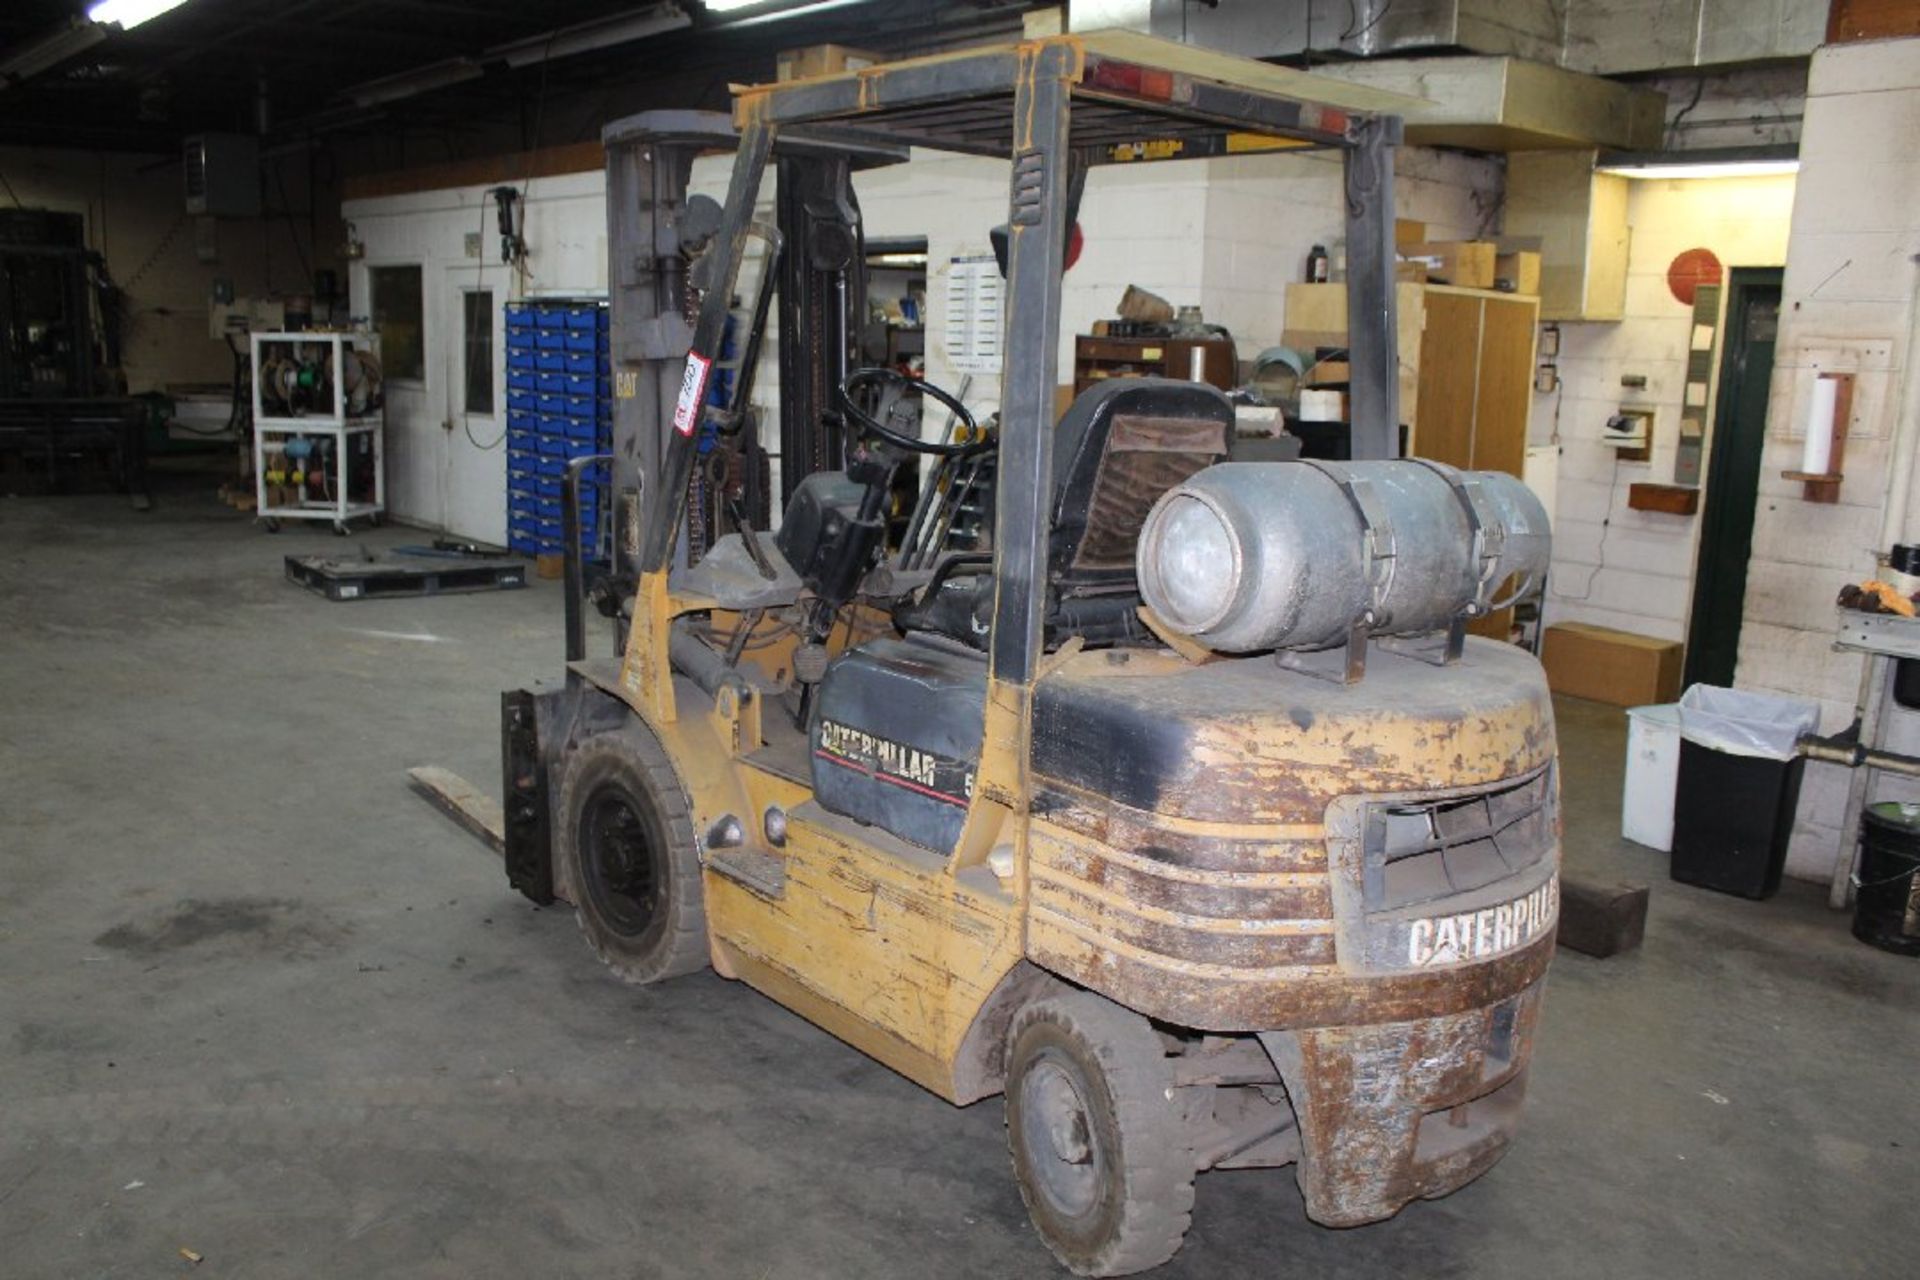 CAT Forklift, LP Gas, Pneumatic Tires (Good Condition), Model TP 25, 5,000 Pound Capacity, 138in - Image 3 of 3